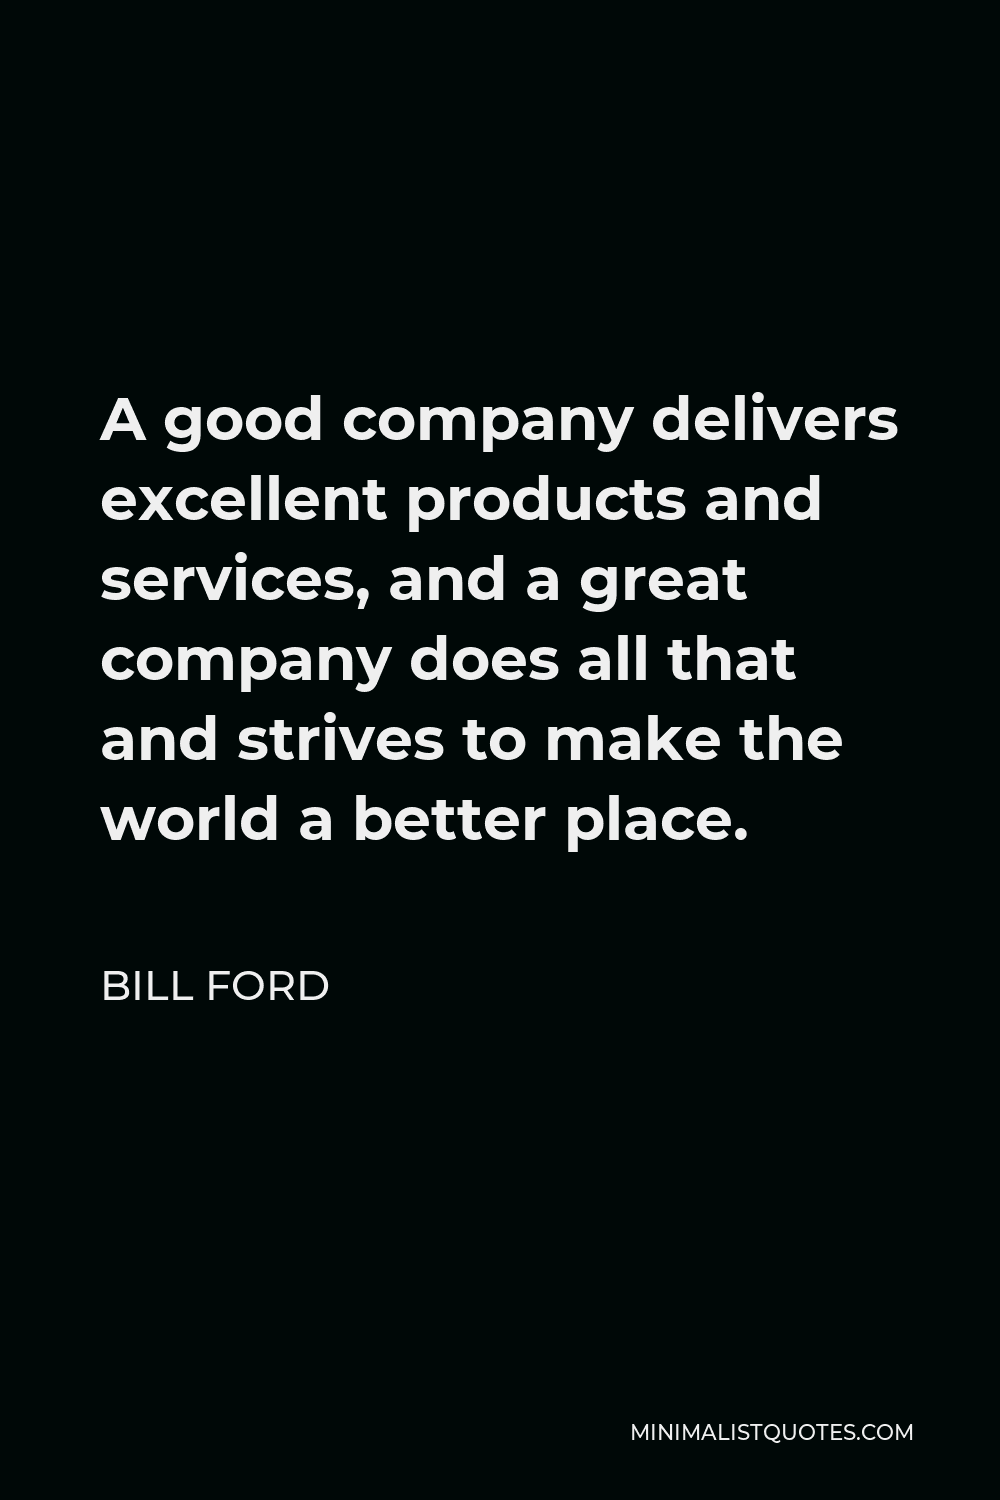 Bill Ford Quote - A good company delivers excellent products and services, and a great company does all that and strives to make the world a better place.